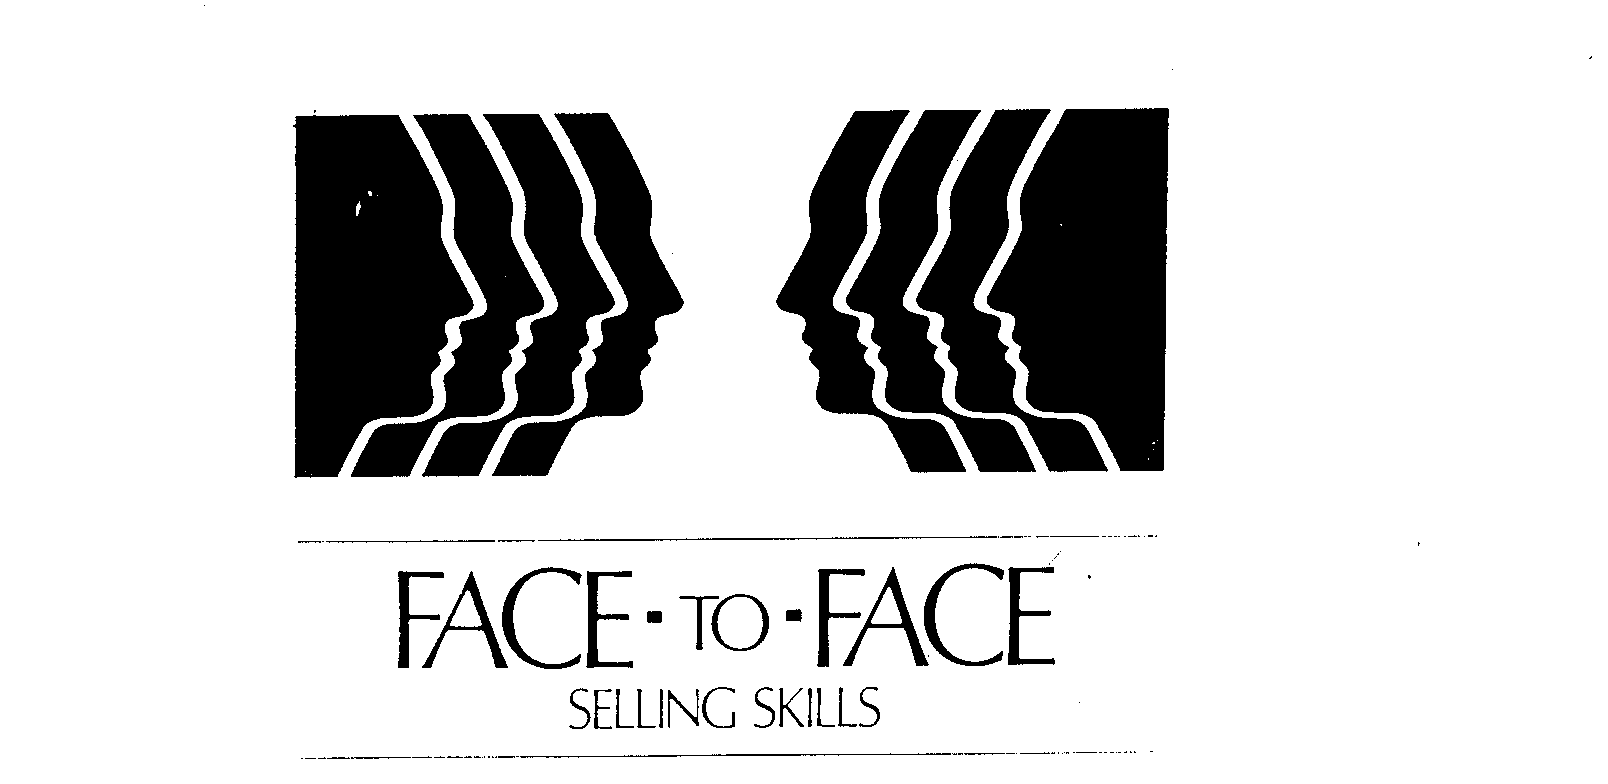 FACE-TO-FACE SELLING SKILLS